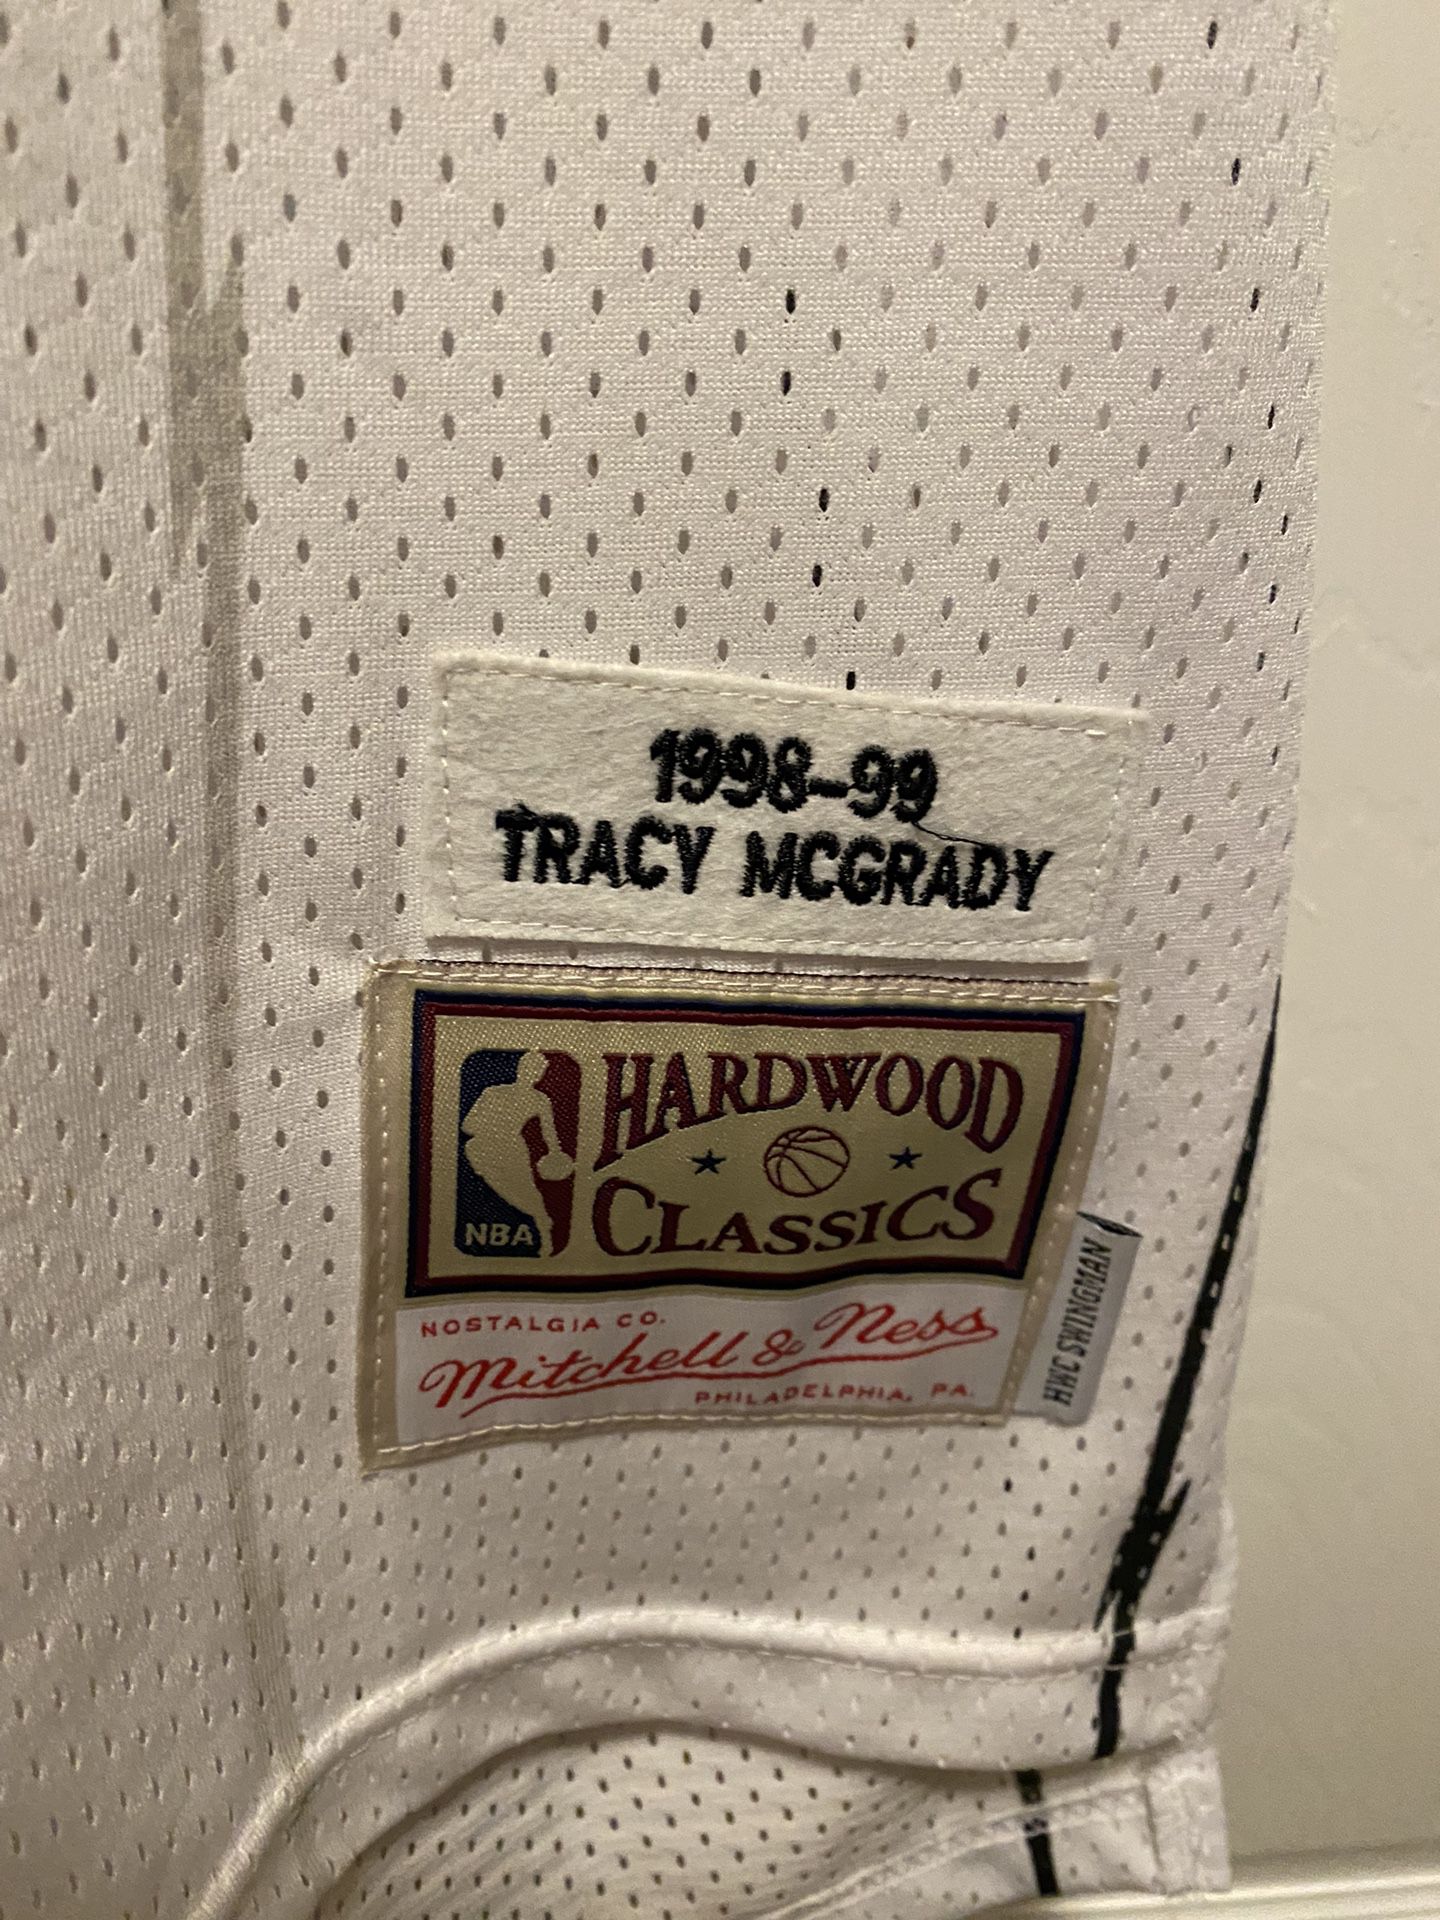 Tracy Mcgrady Jersey for Sale in Silverton, OR - OfferUp